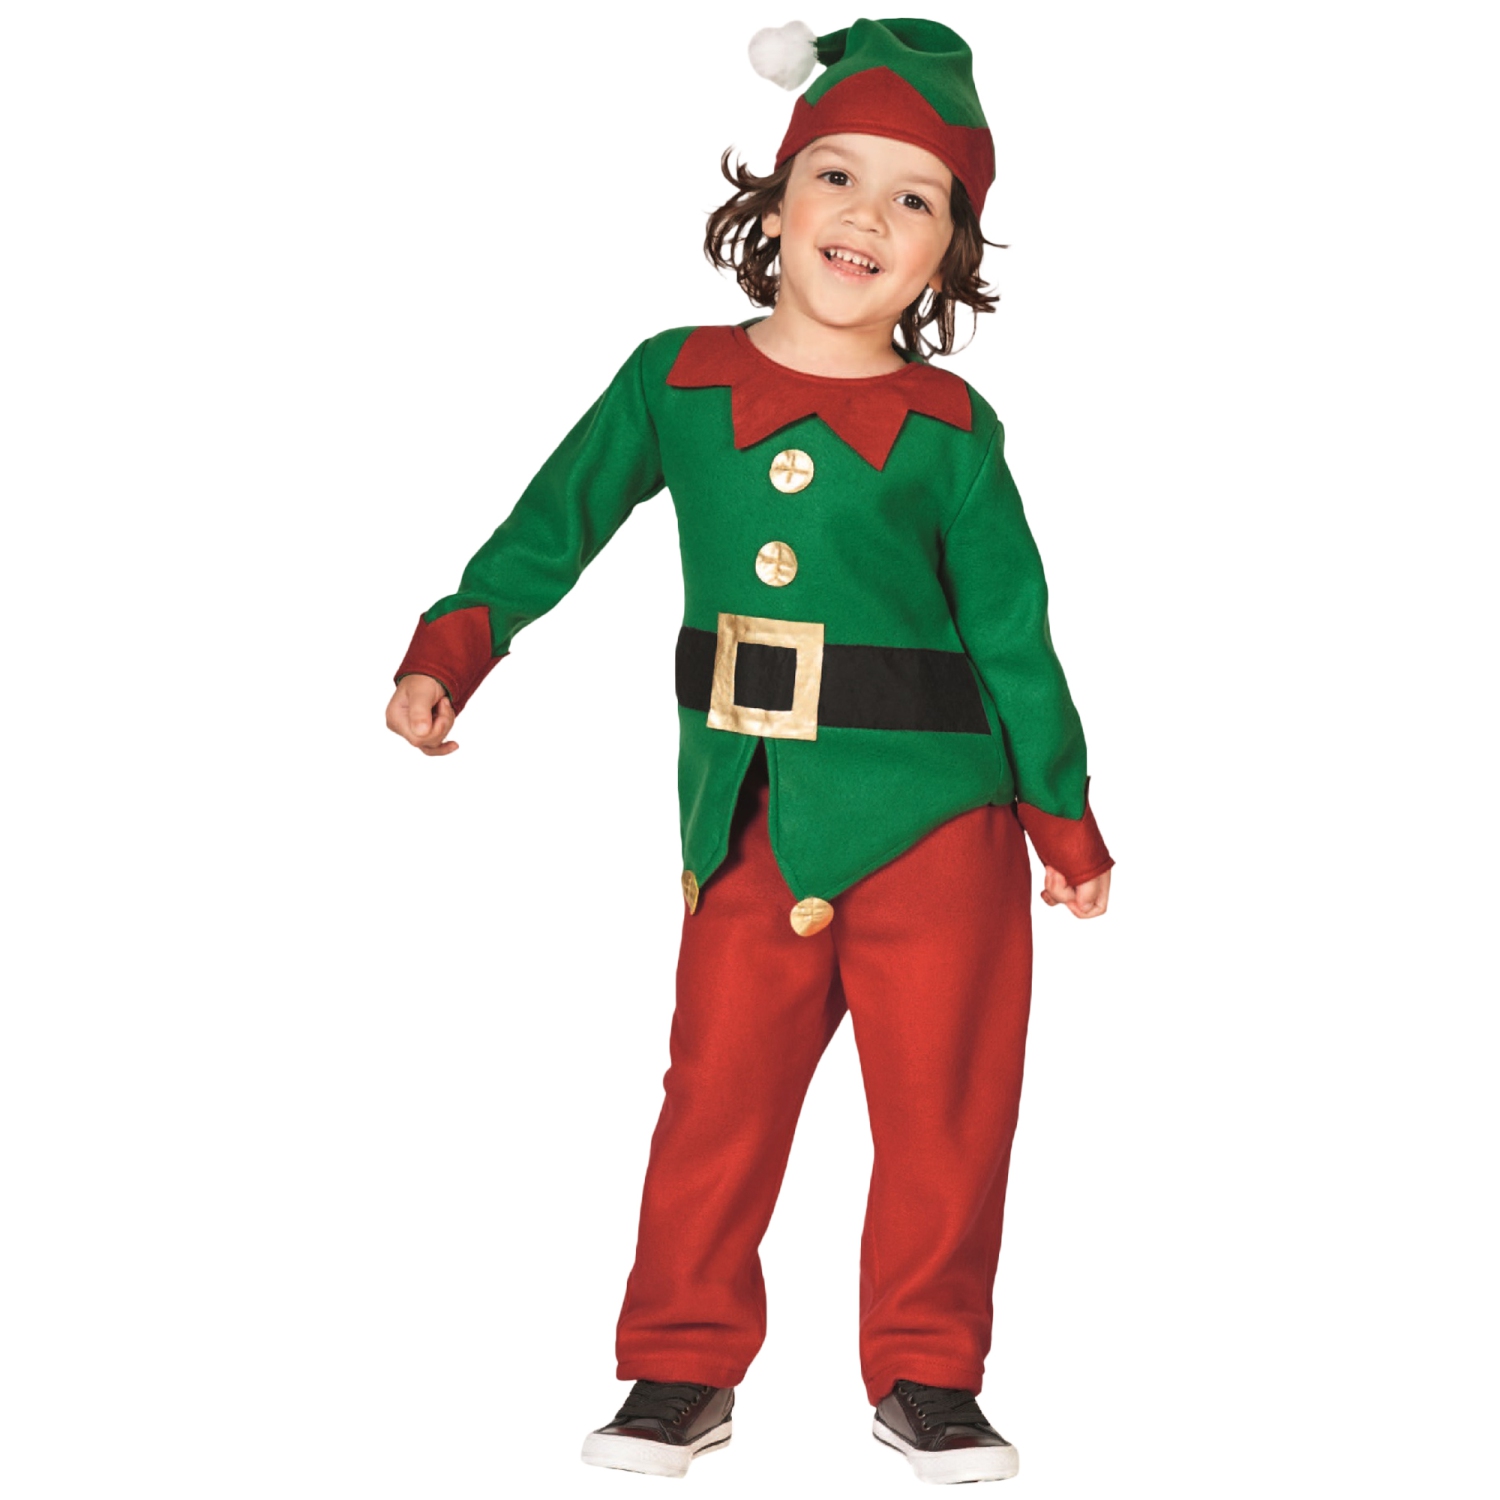 26" Red and Green Elf Boy's Costume With a Christmas Santa Hat - 6-8 Years